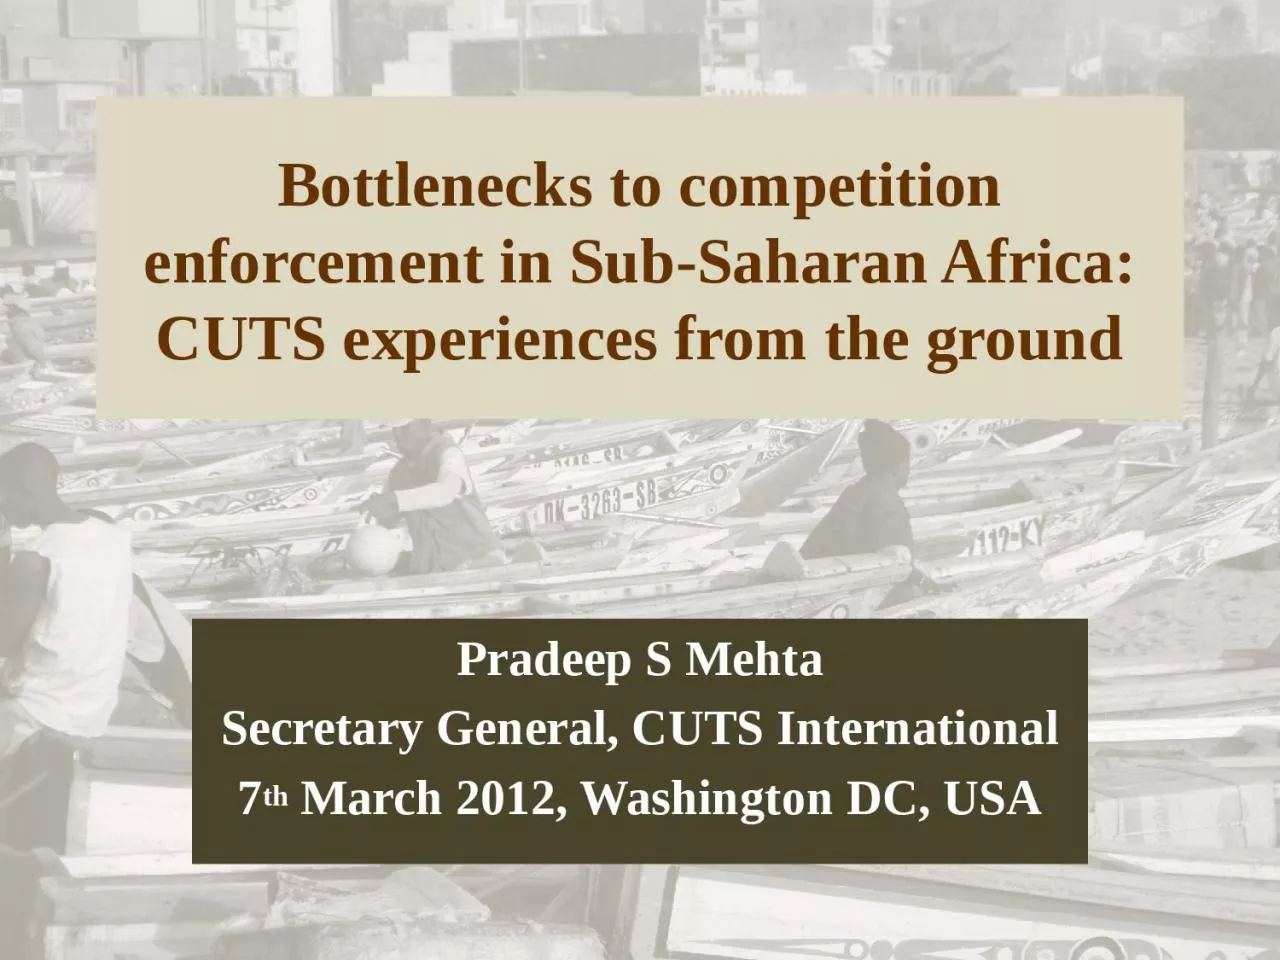 Bottlenecks to competition enforcement in Sub-Saharan Africa: CUTS experiences from the